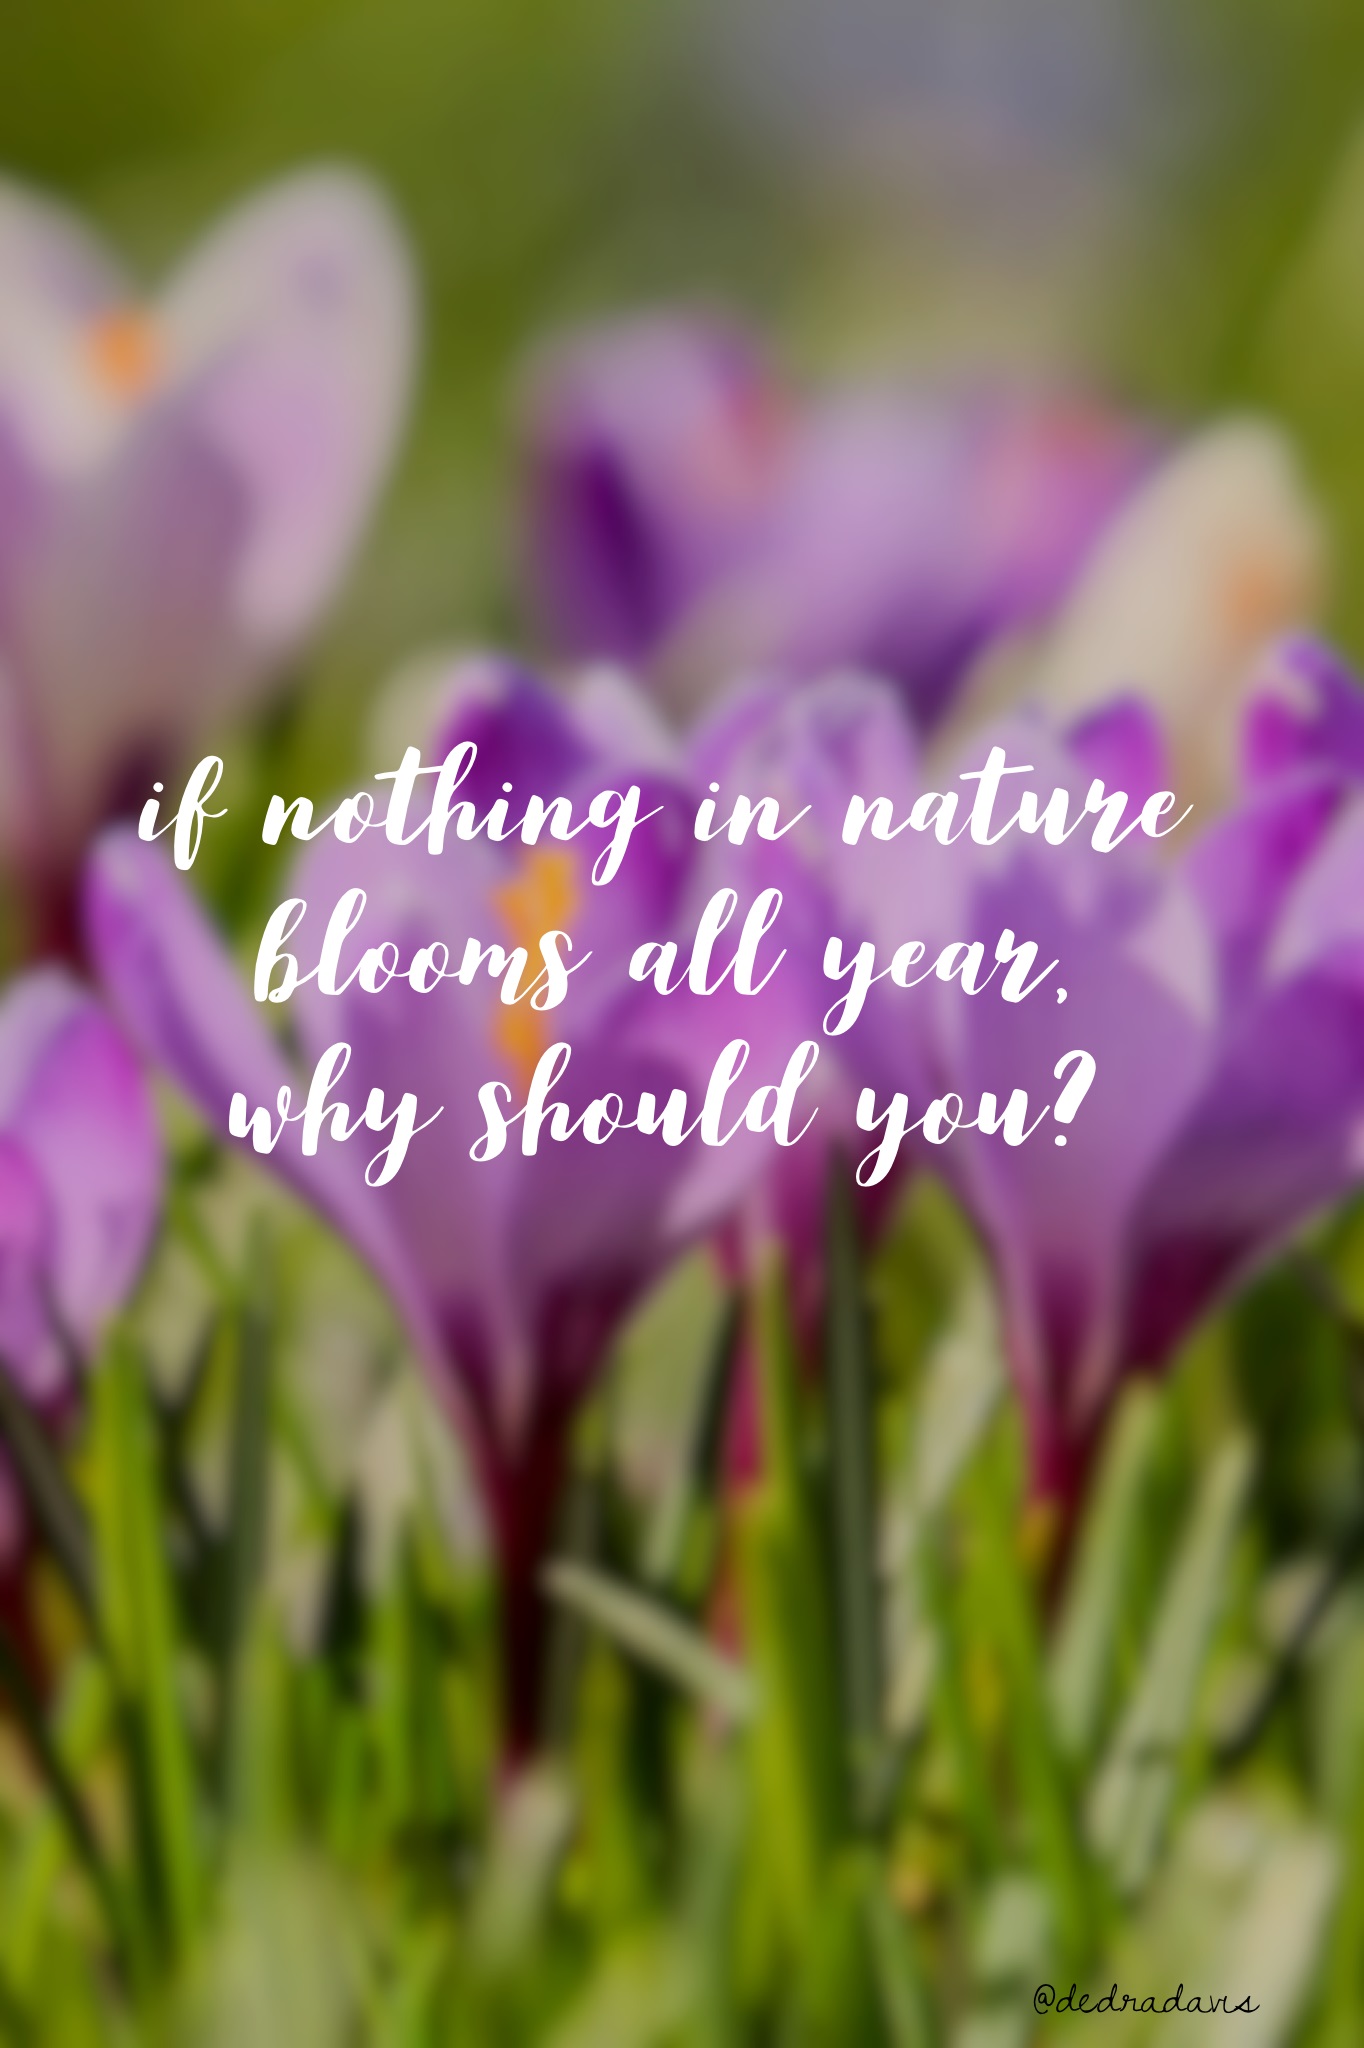 If Nothing In Nature Blooms All Year, Why Should You?